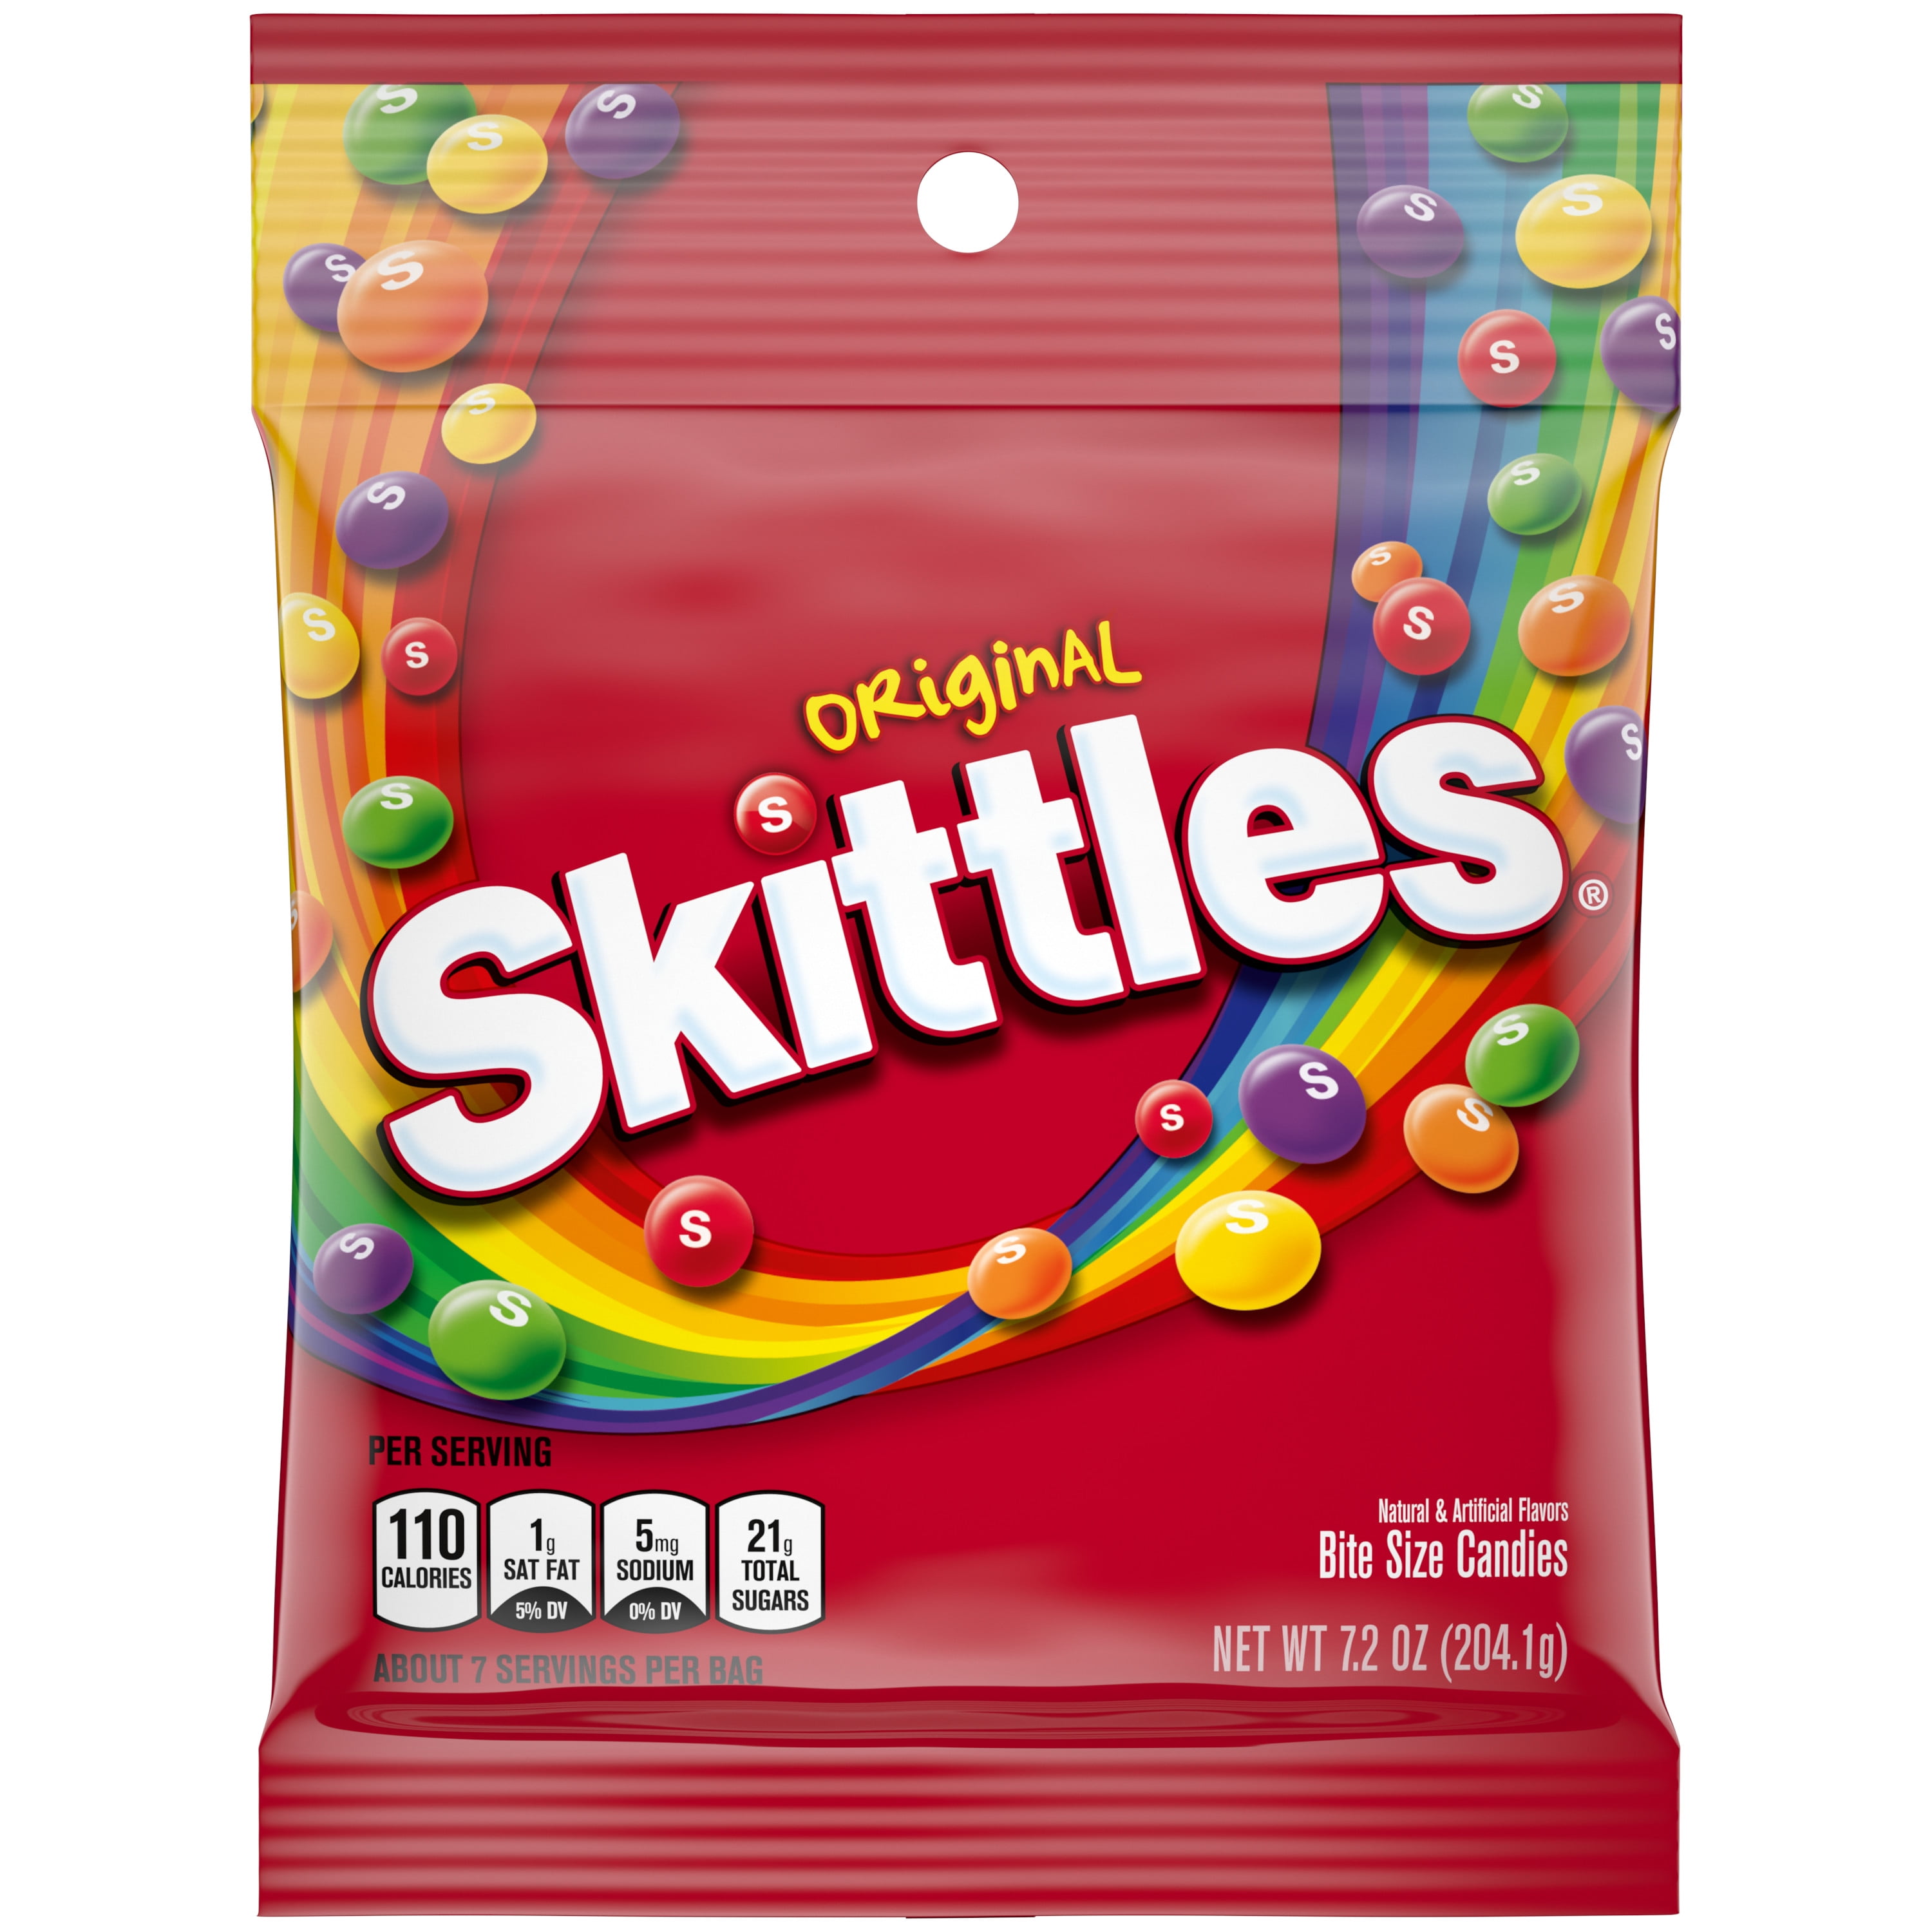 Skittles Original Chewy Candy - 7.2 oz Bag